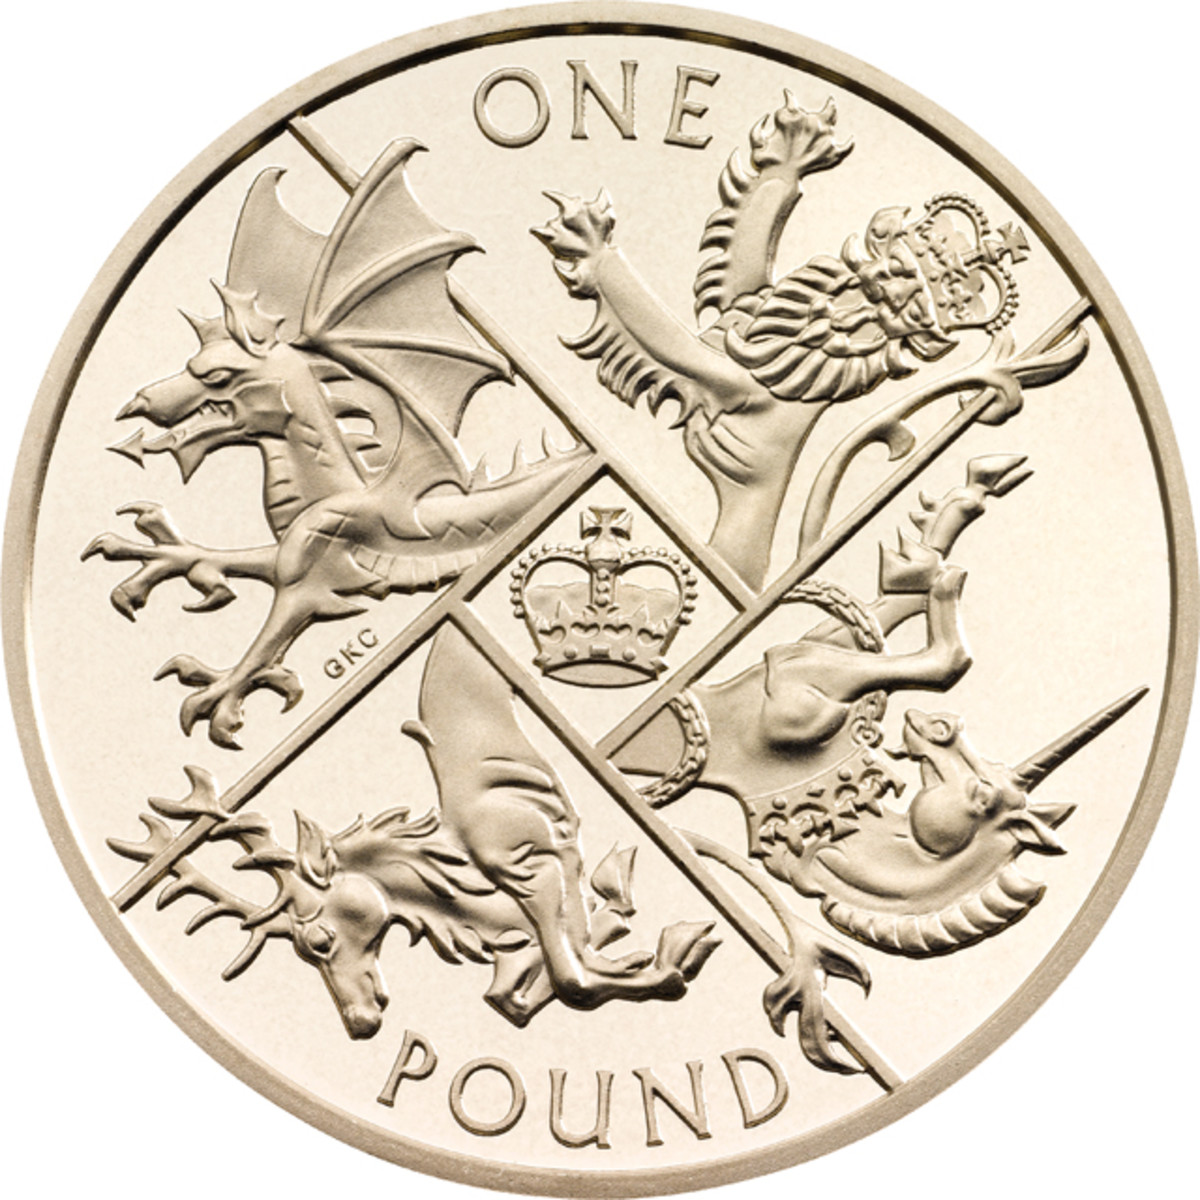 The reverse of Britain’s very last round pound, the 2016 commemorative piece available in sets only that shows the four Royal Beasts; design by Gregory Cameron. Image courtesy and © The Royal Mint.